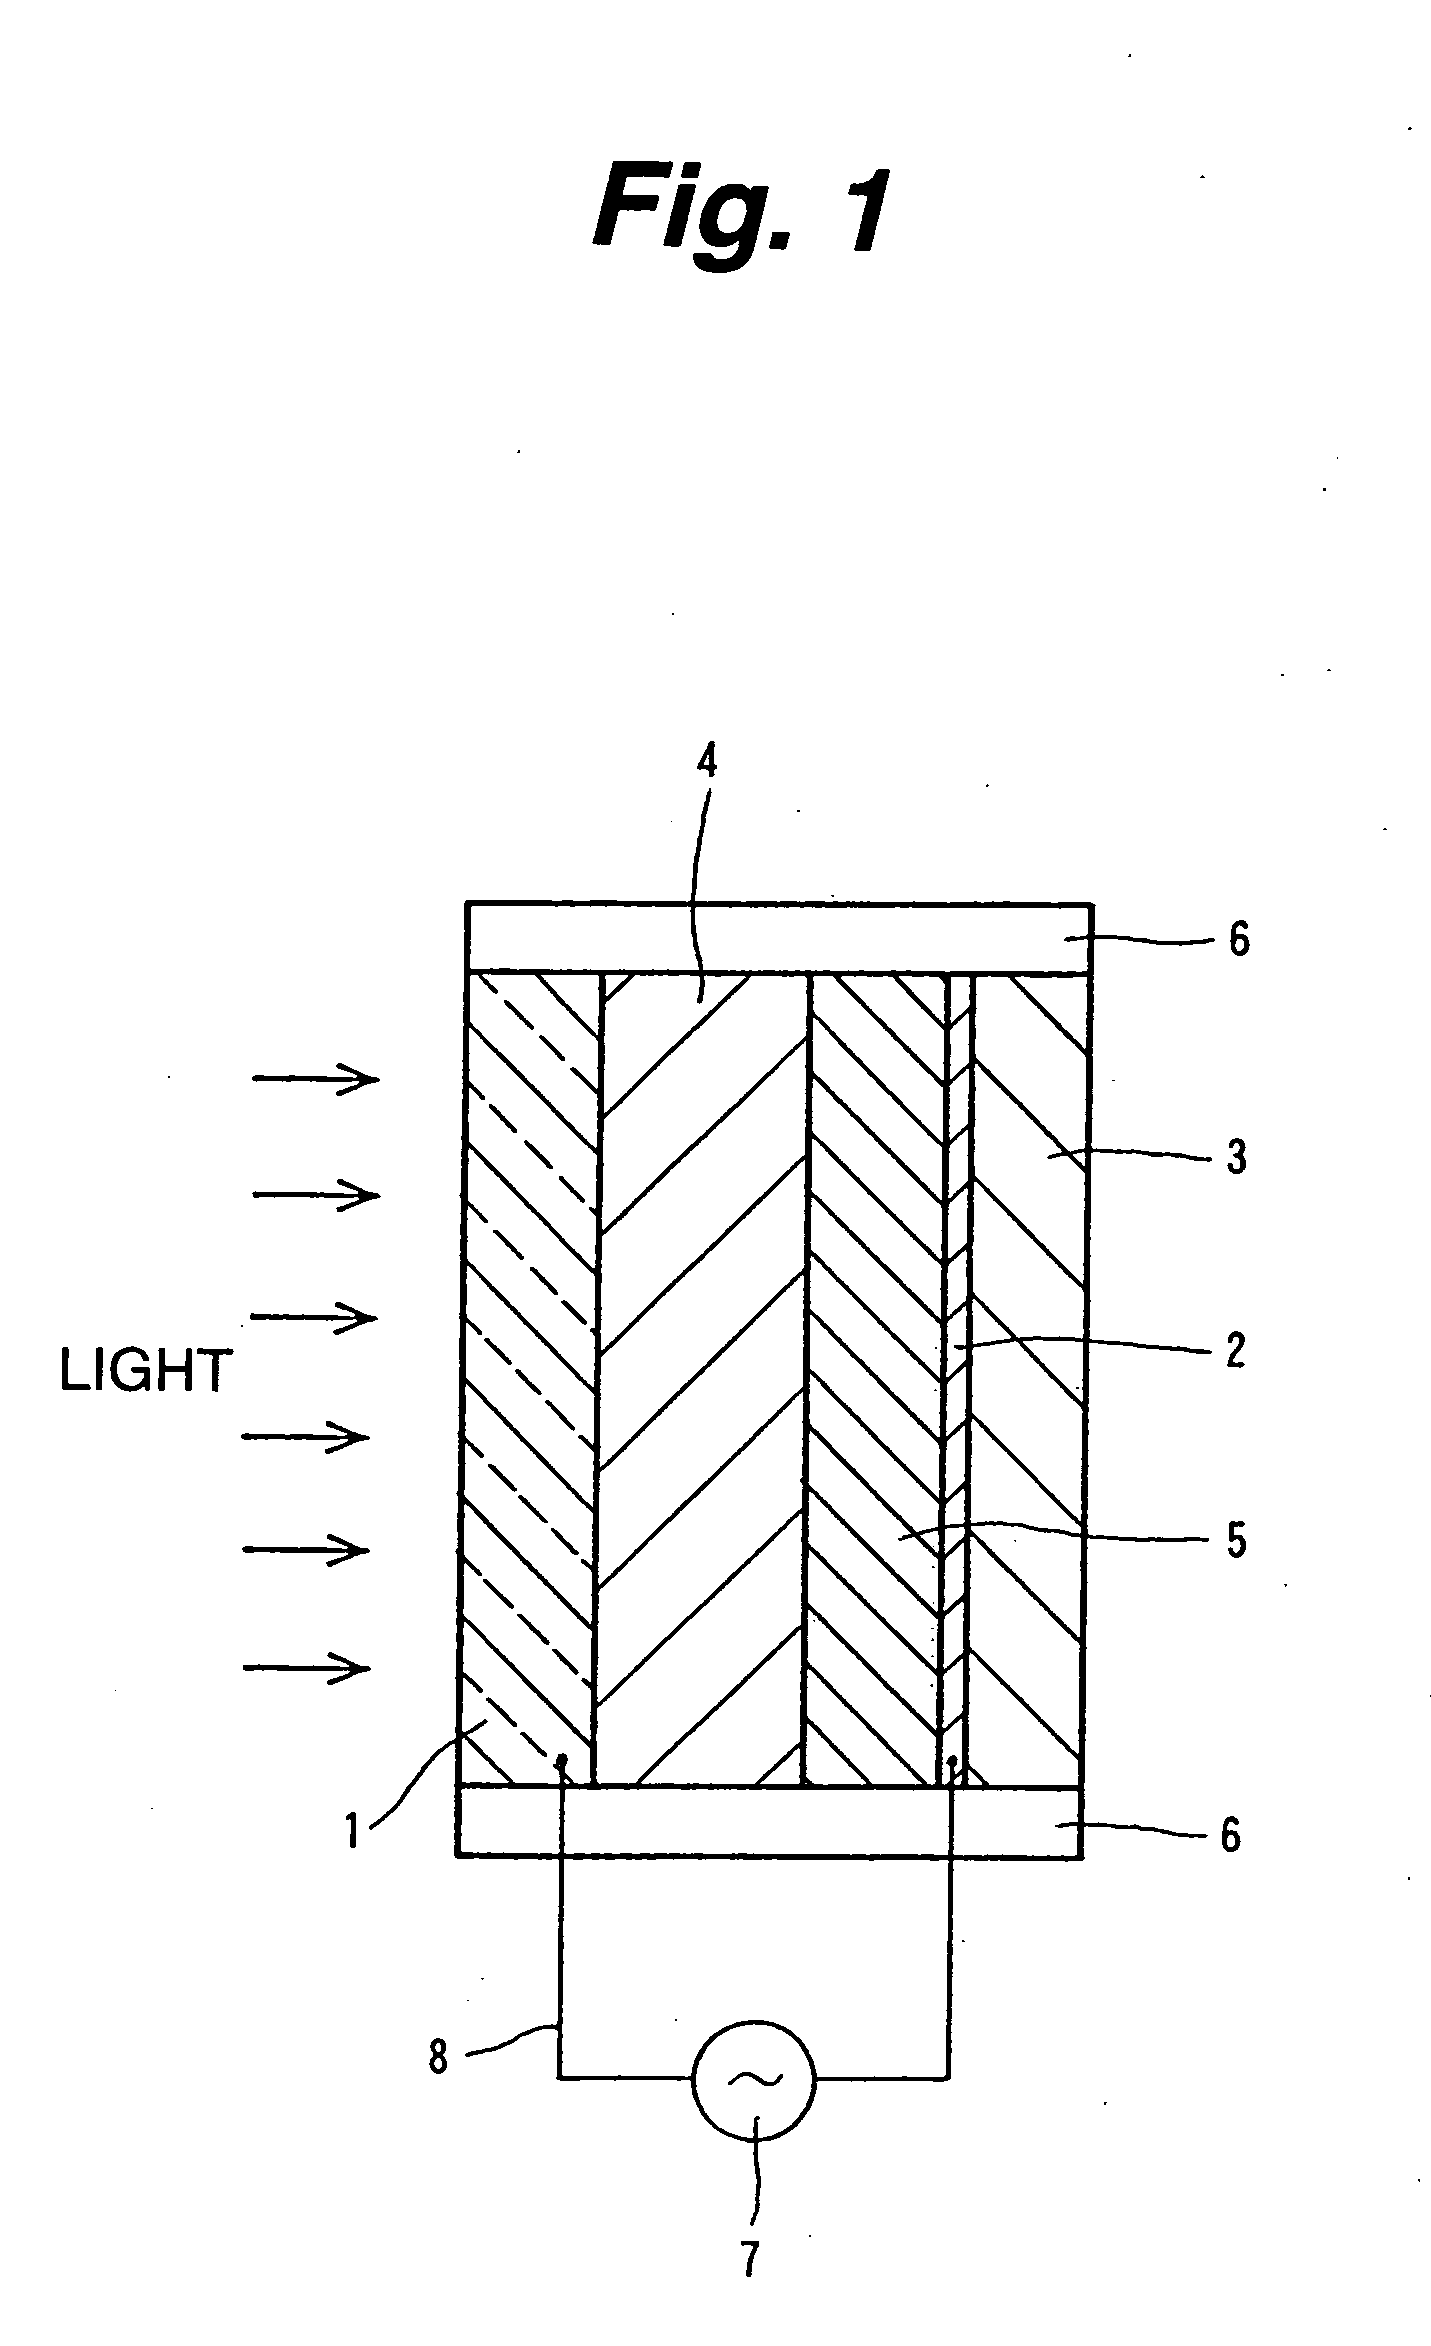 Dye sensitization photoelectric converter and process for fabricating the same